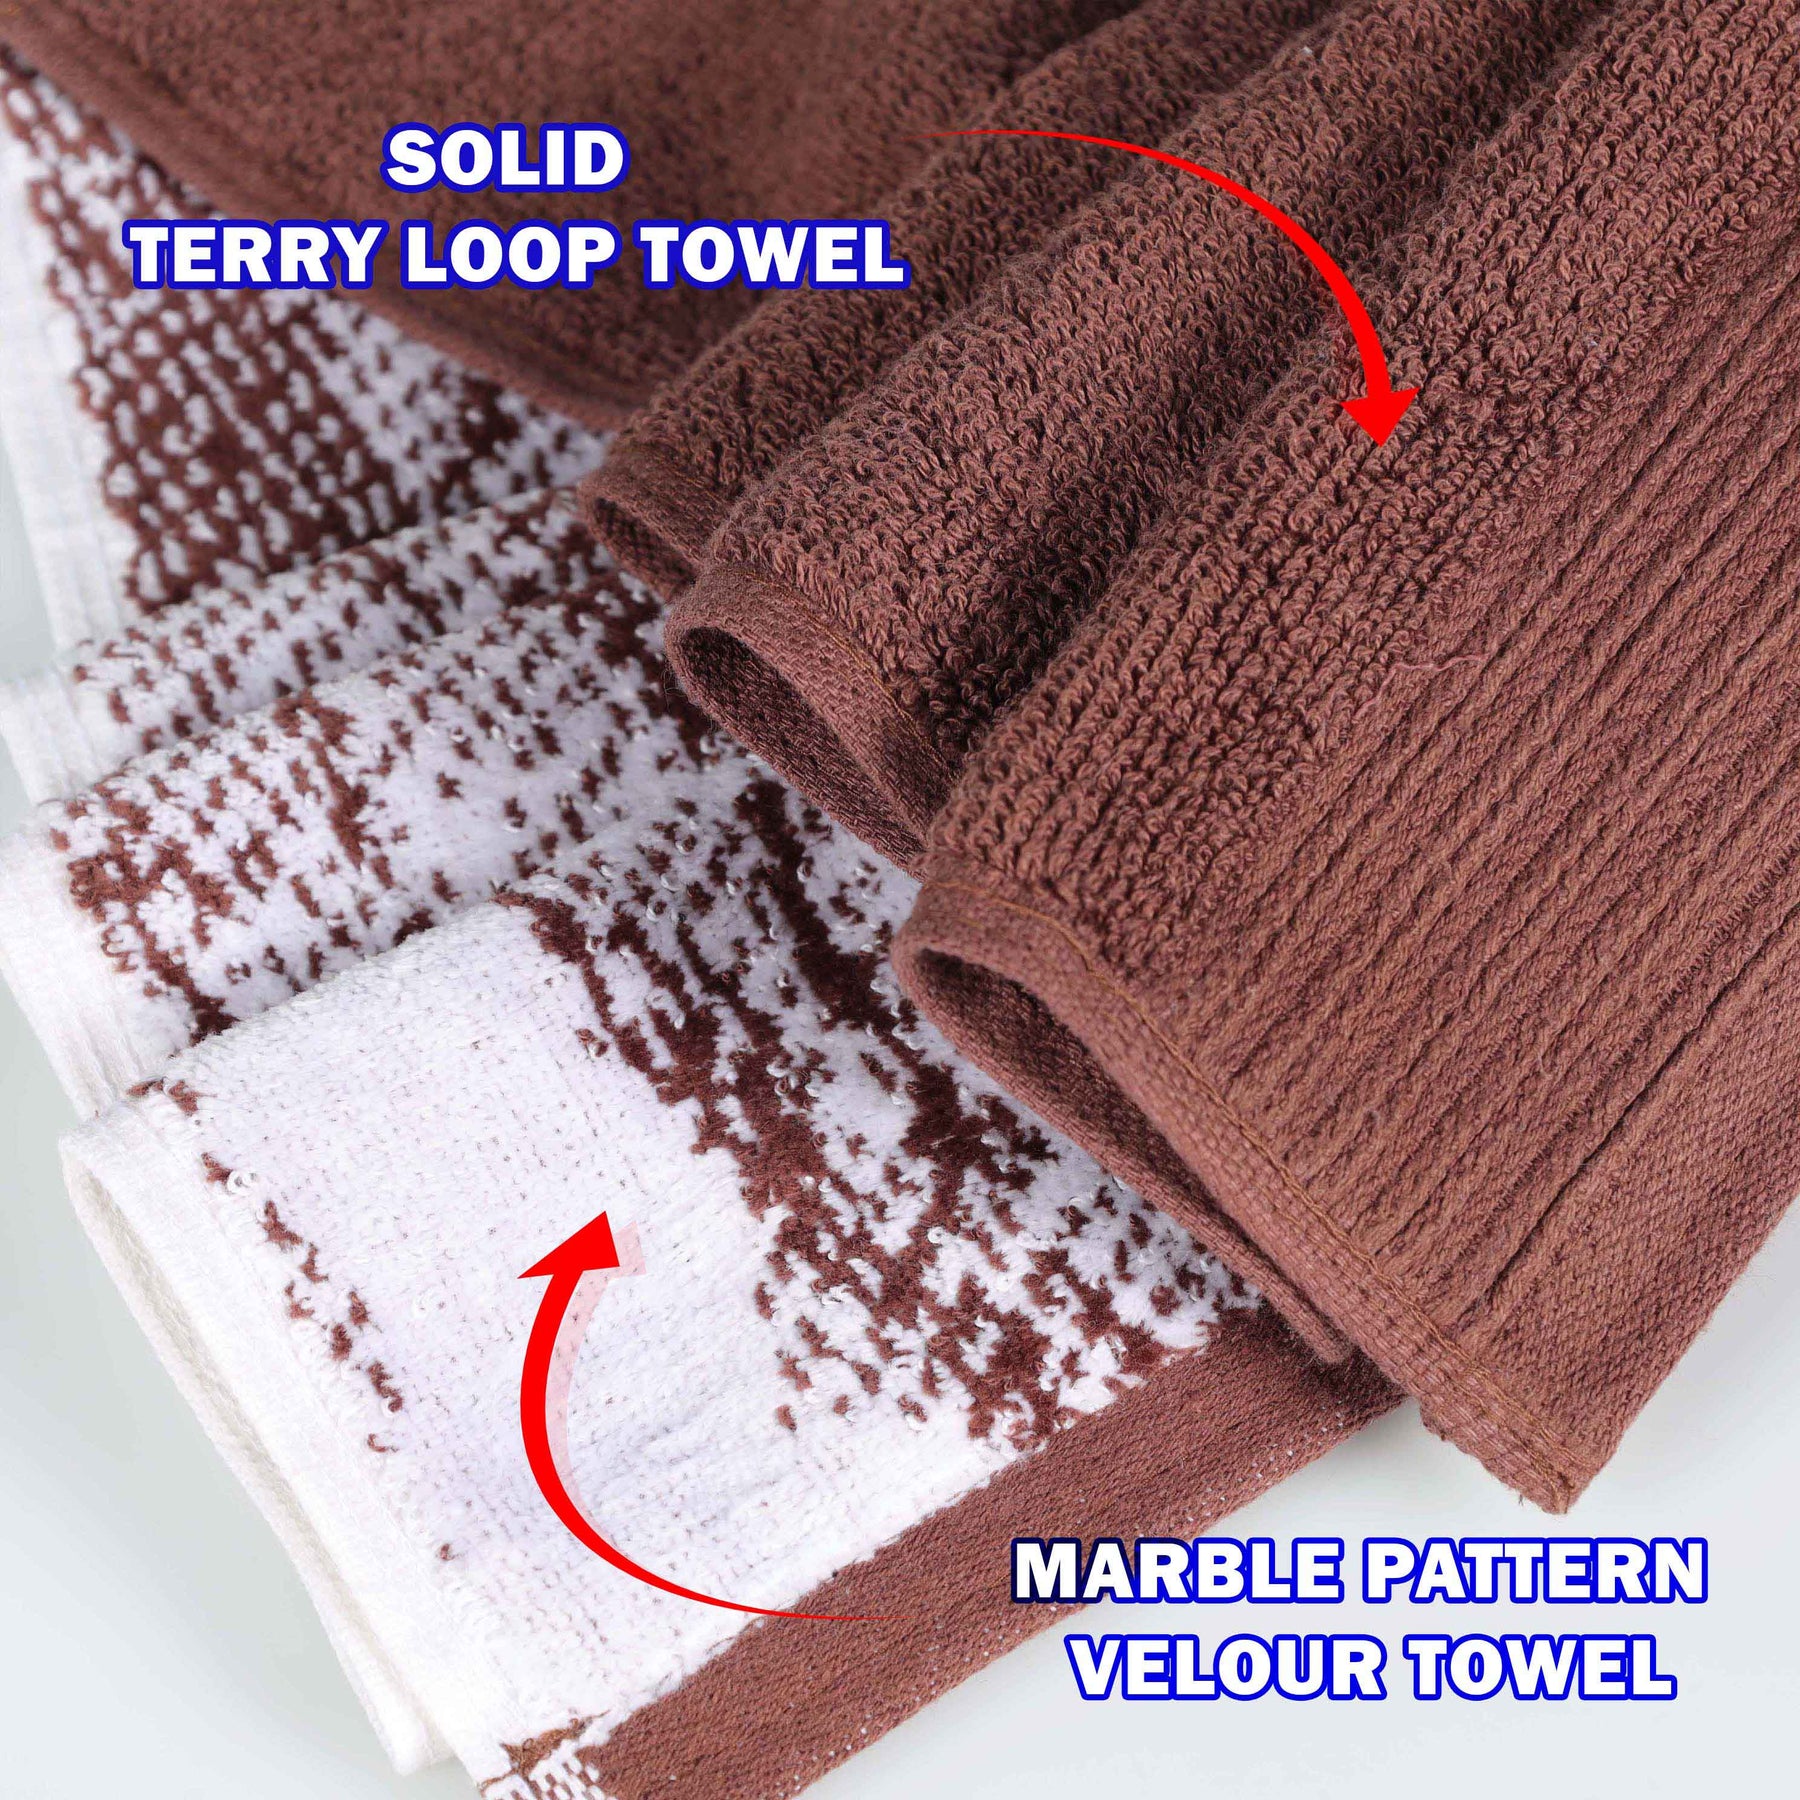 Cotton Marble and Solid Quick Dry 8 Piece Assorted Bathroom Towel Set - Brown